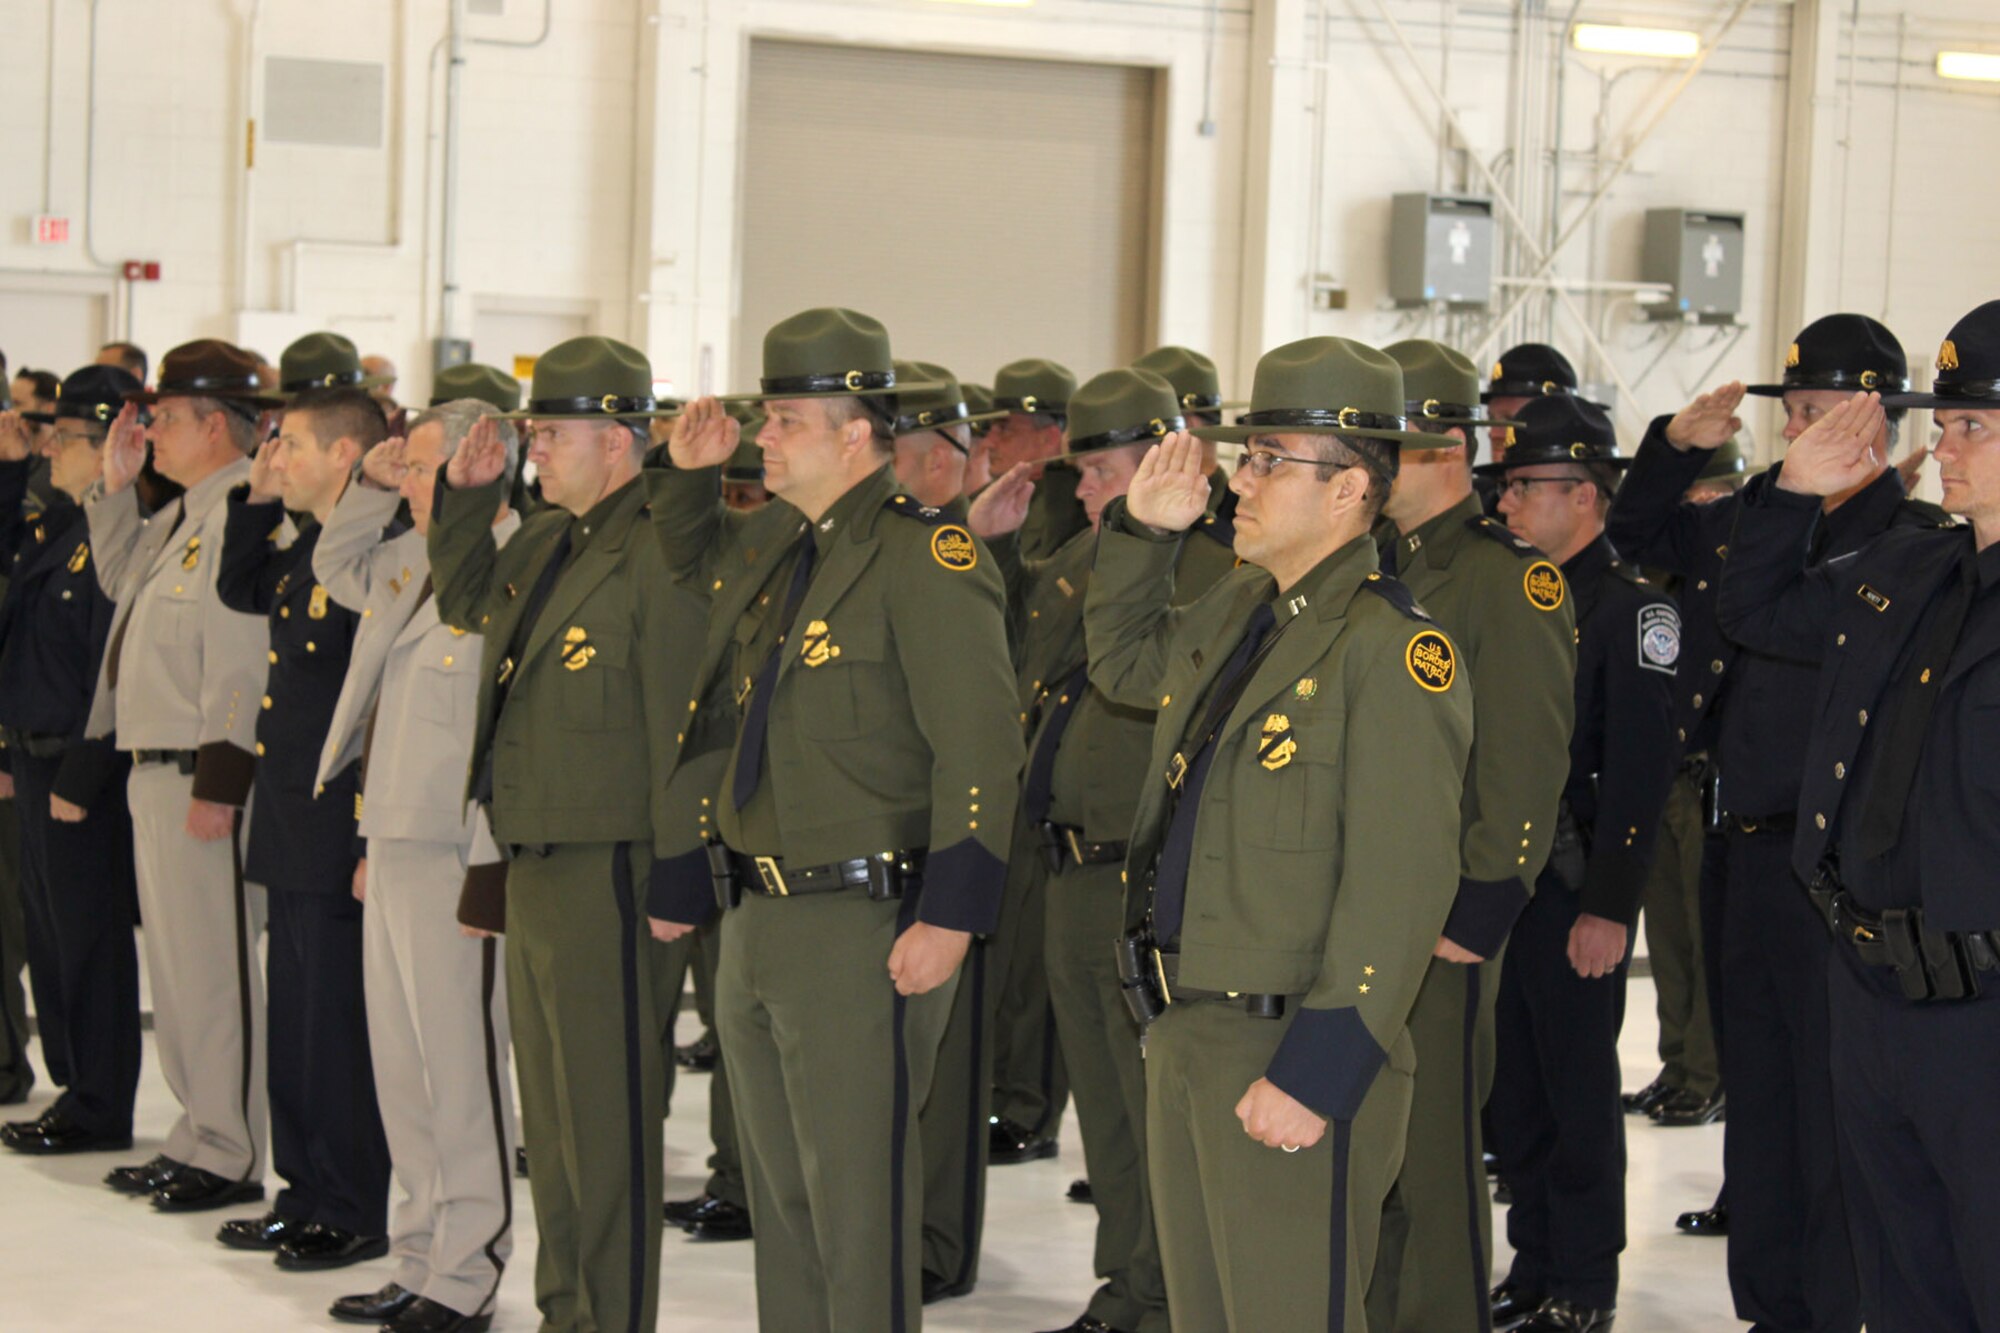 Federal and local law enforcement officers paused during a ceremony on May 15, 2015, at Selfridge Air National Guard Base, Mich., to mark Police Officers Memorial Day.  The event honored the sacrifices of their colleagues who have made the ultimate sacrifice in the line of duty. More than 130 law enforcement officers died while on duty in the U.S. in 2014.  (U.S. Air National Guard photo by Tech. Sgt. Dan Heaton)